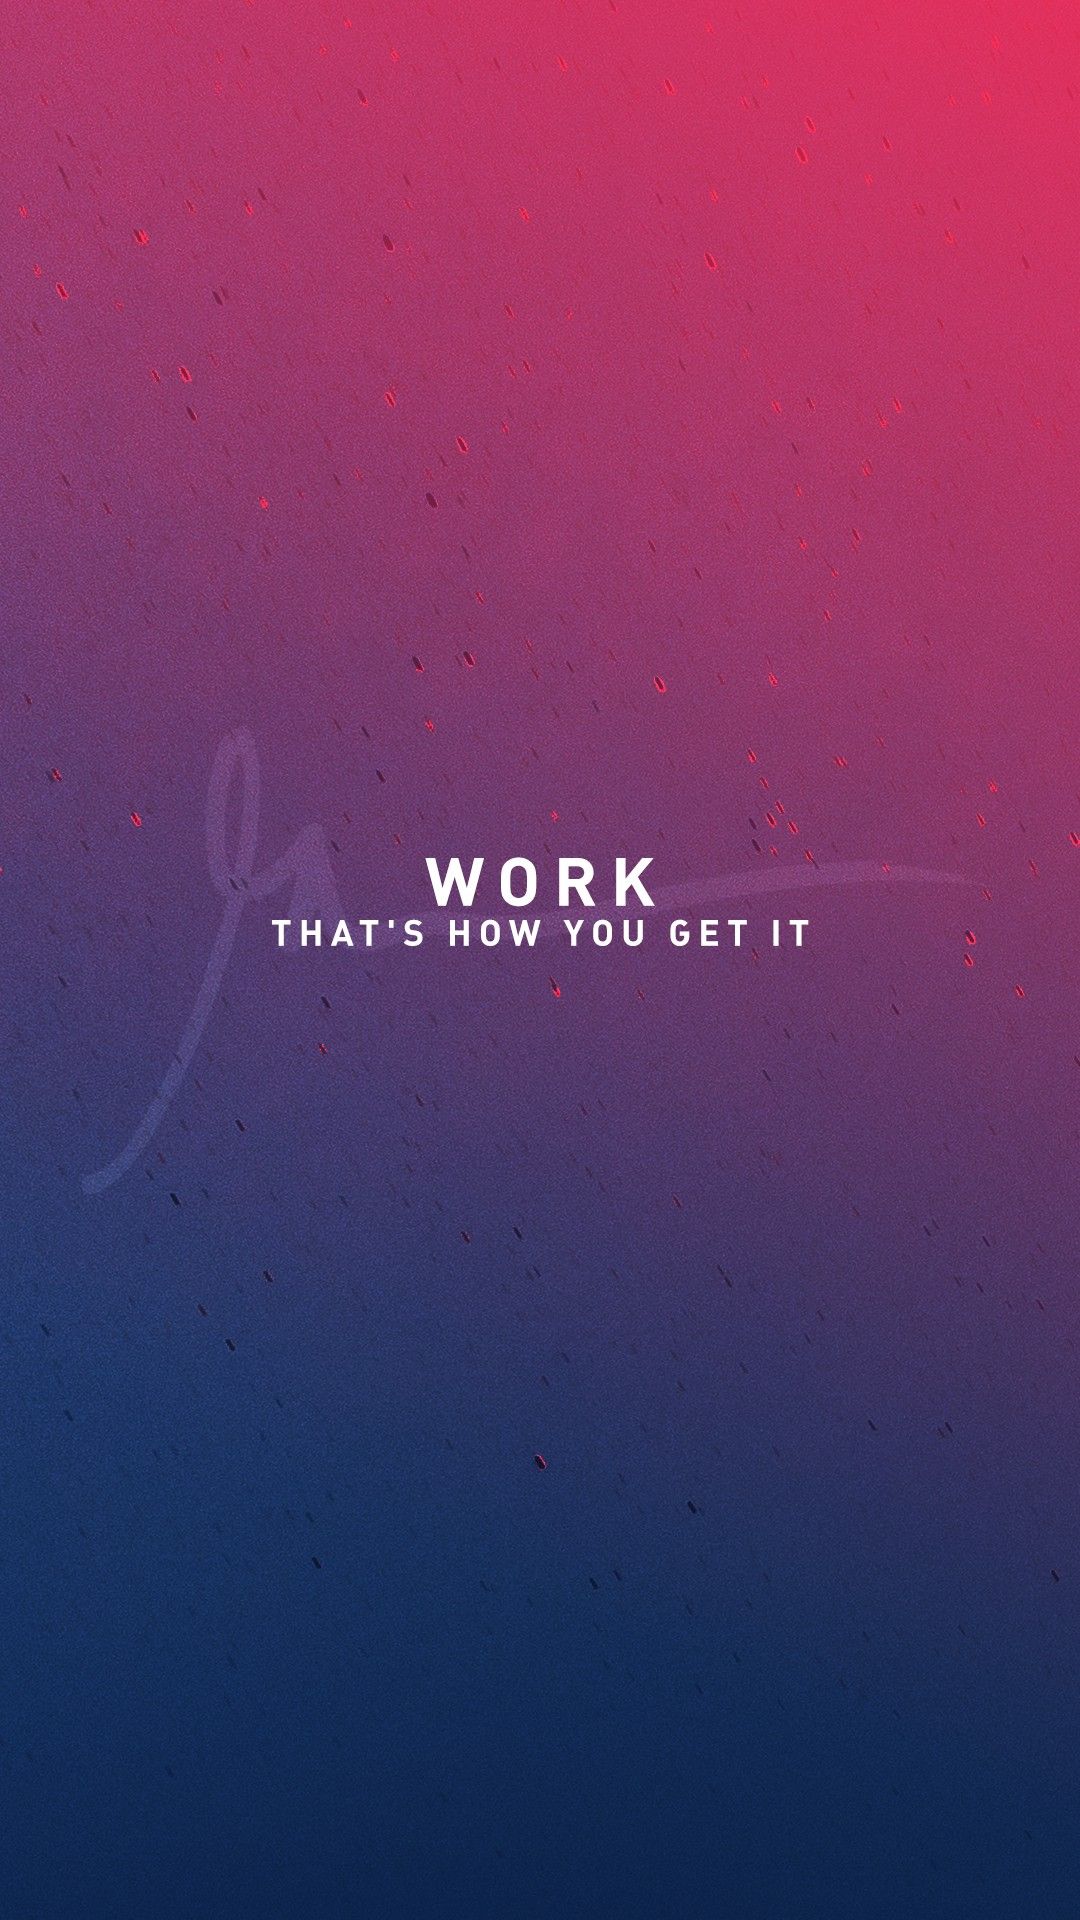 GaryVee WallPapers. Life quotes wallpaper, Study motivation